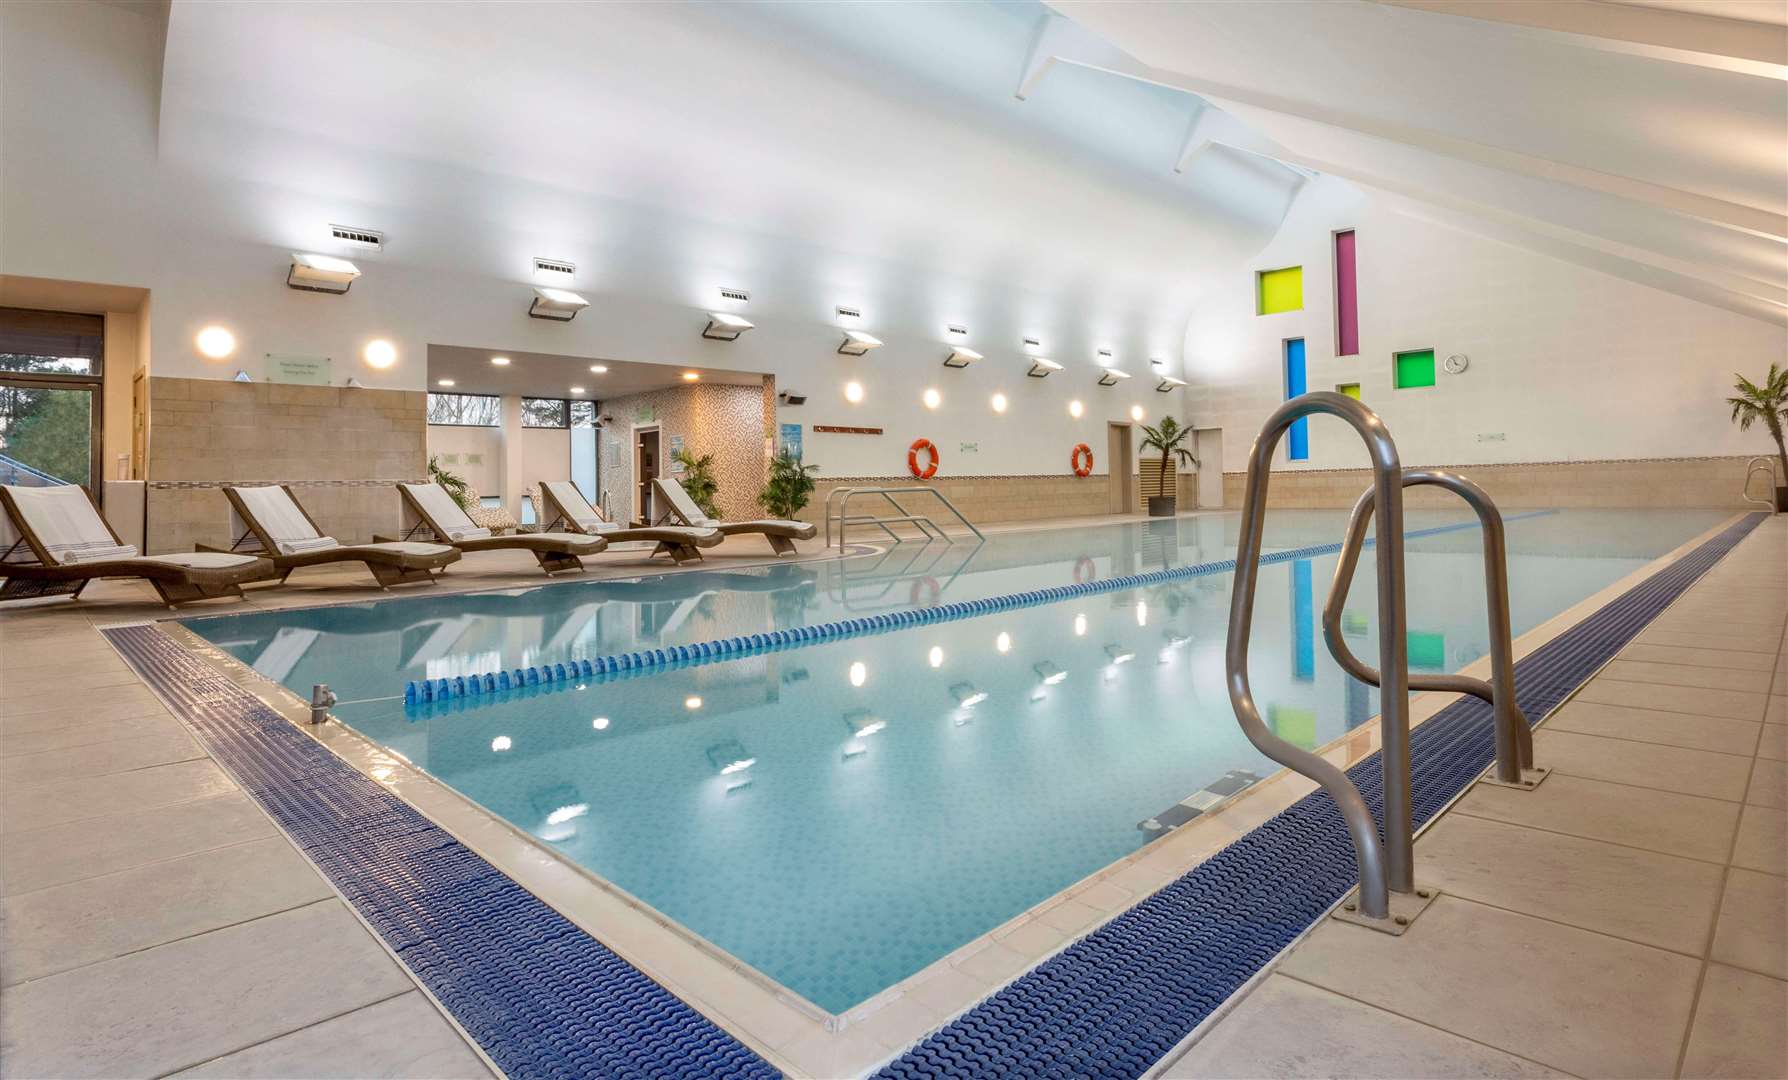 There’s something for the whole family, from a kids’ pool to spa treatments for adults, at Ashford International Hotel and Spa. Picture: Blueprintx